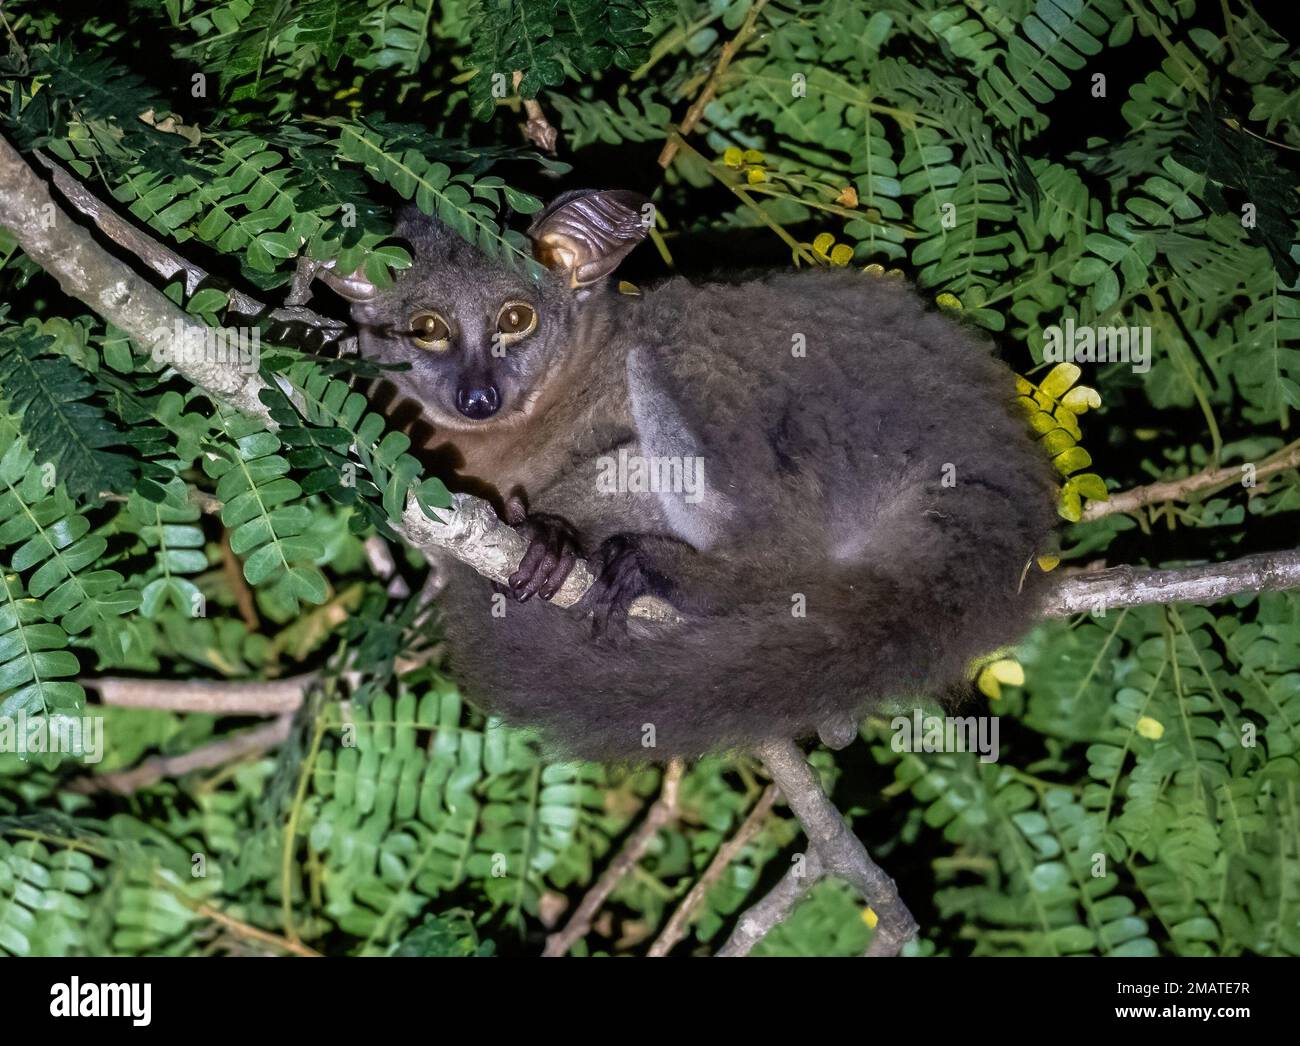 A Thick-Tailed Bushbaby (Otolemur crassicaudatus), or brown greater galago, on a tree at night. Kwazulu-Natal, South Afric Stock Photo